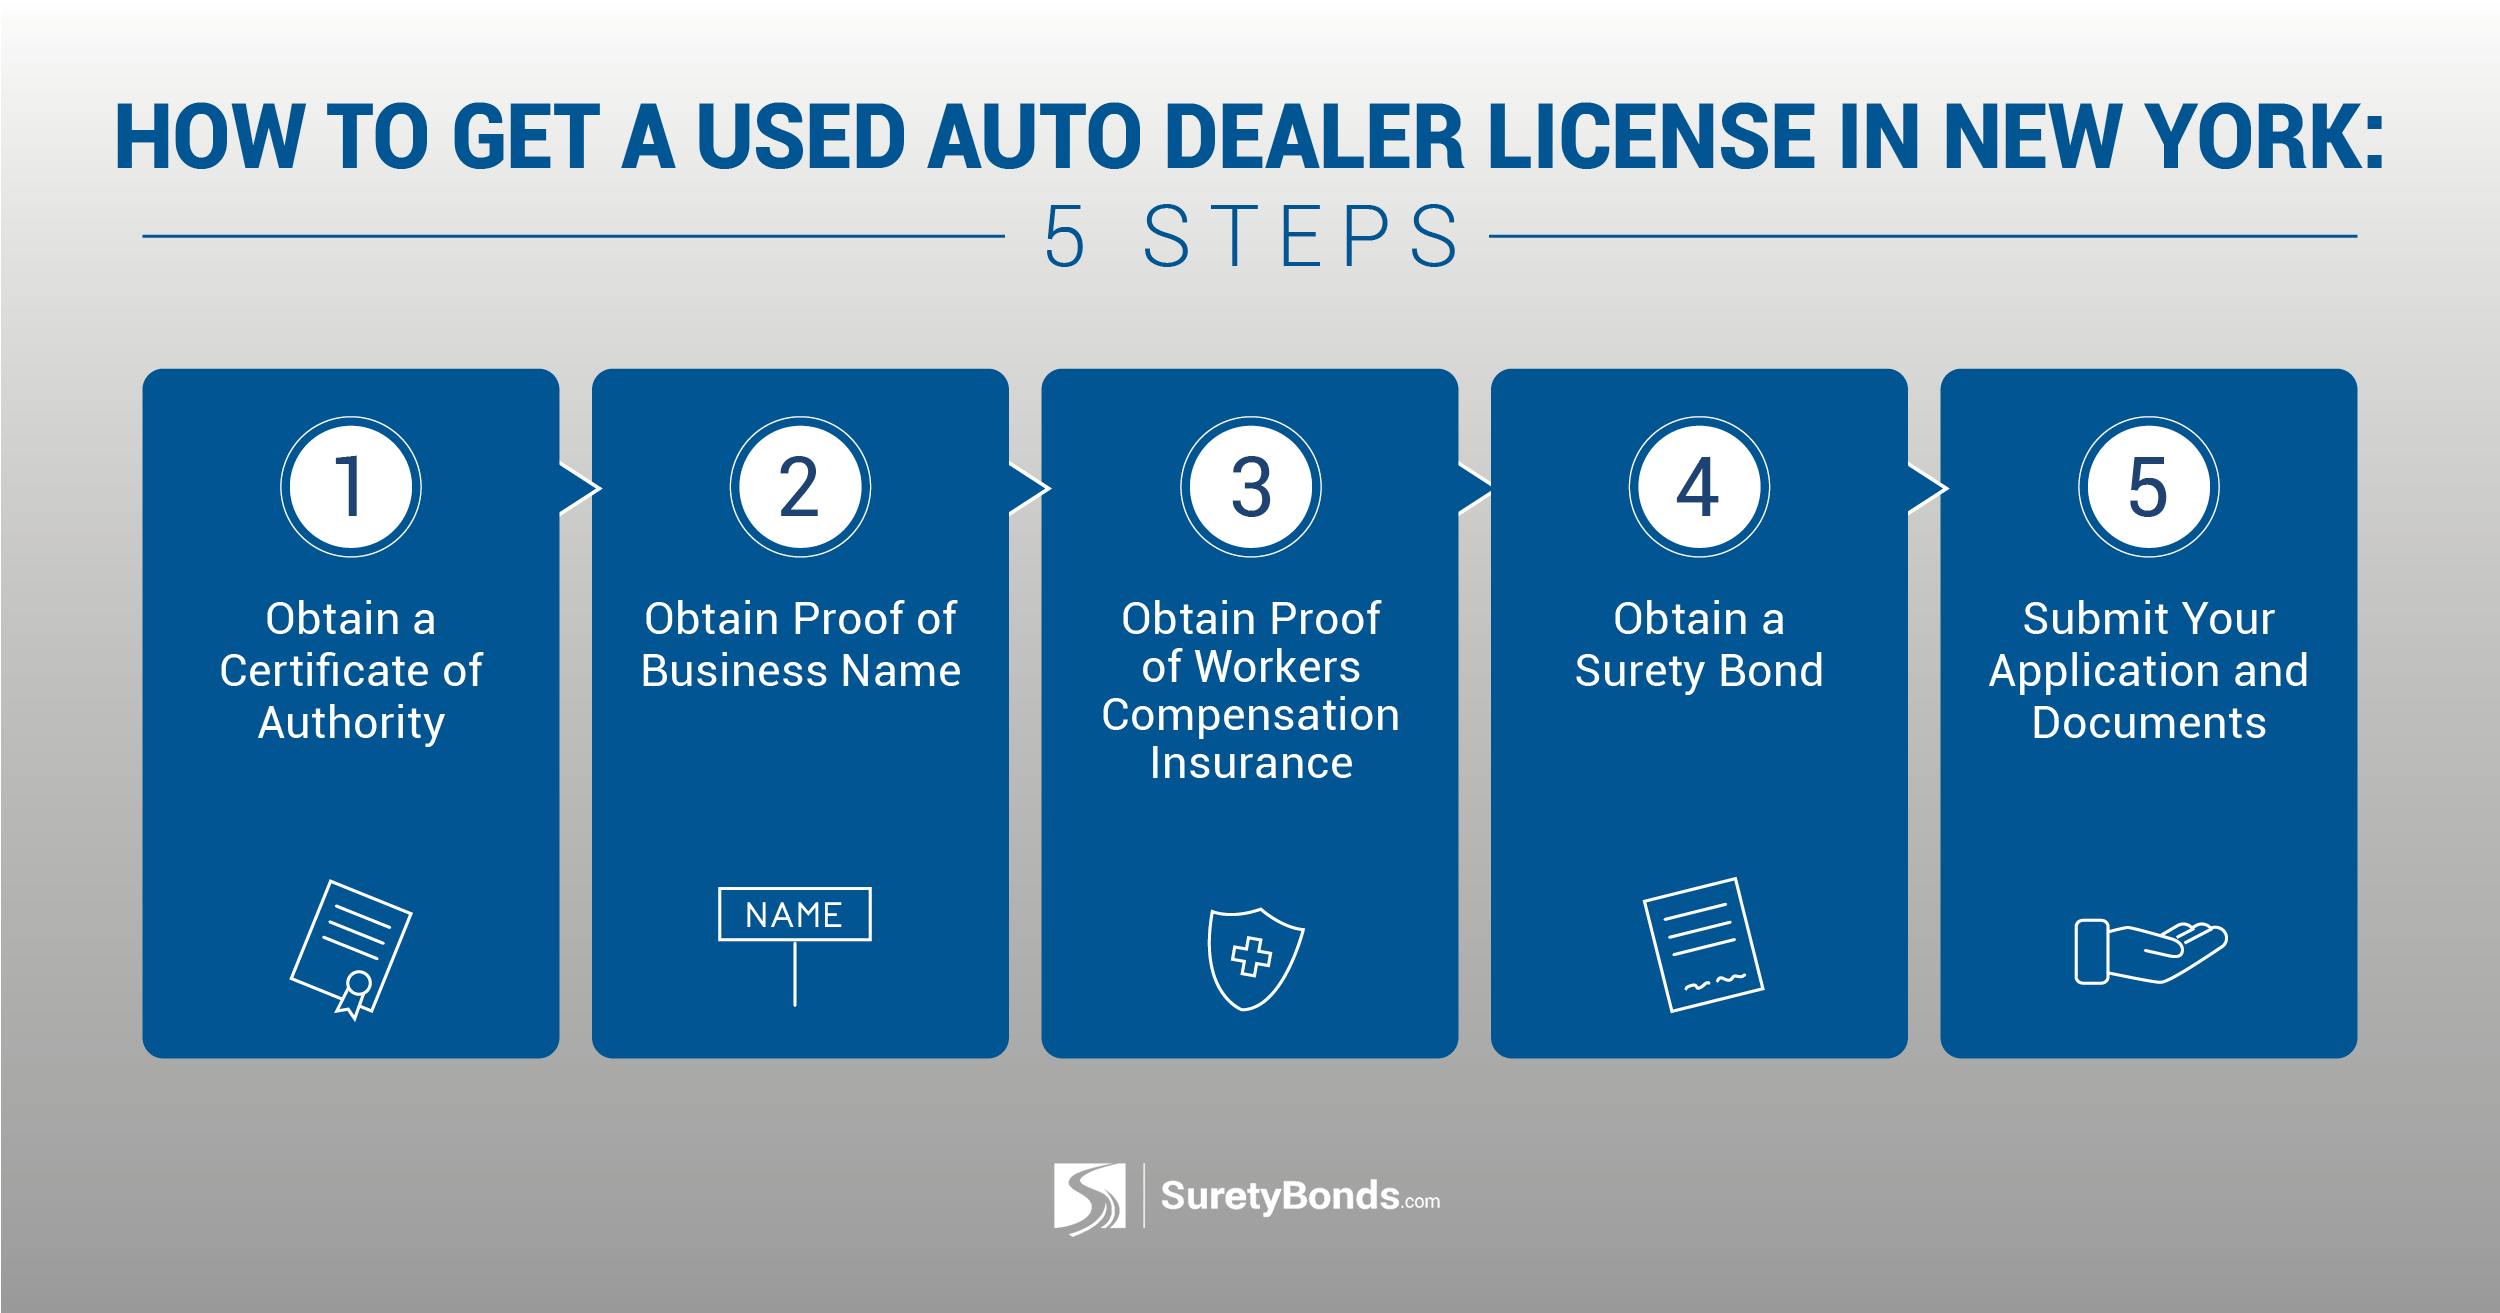 How to Get a Used Auto Dealer License in New York Graphic